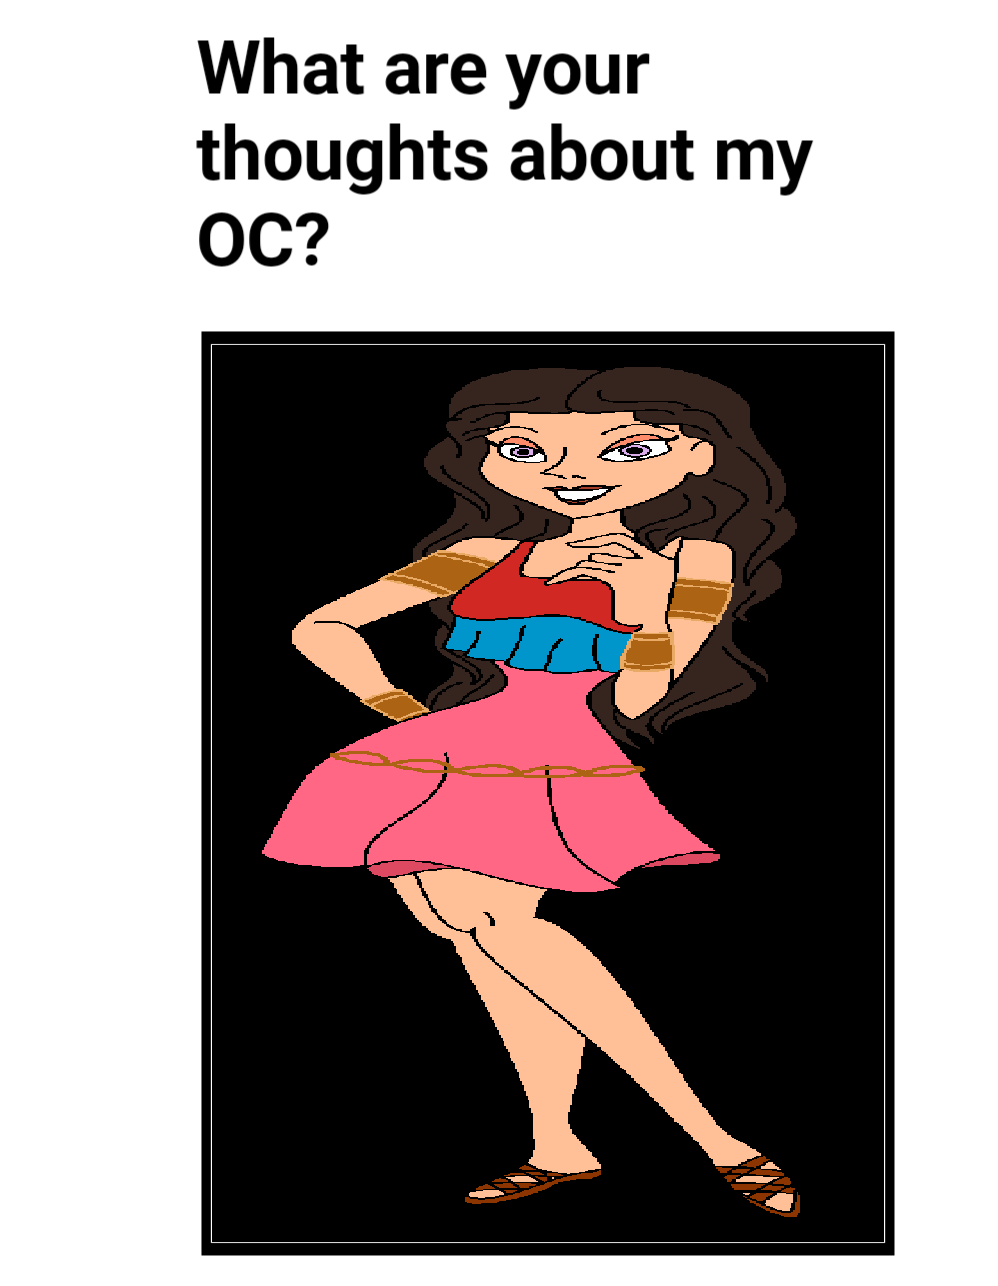 Other OCs on Heroine Creator by topcatmeeces97 on DeviantArt